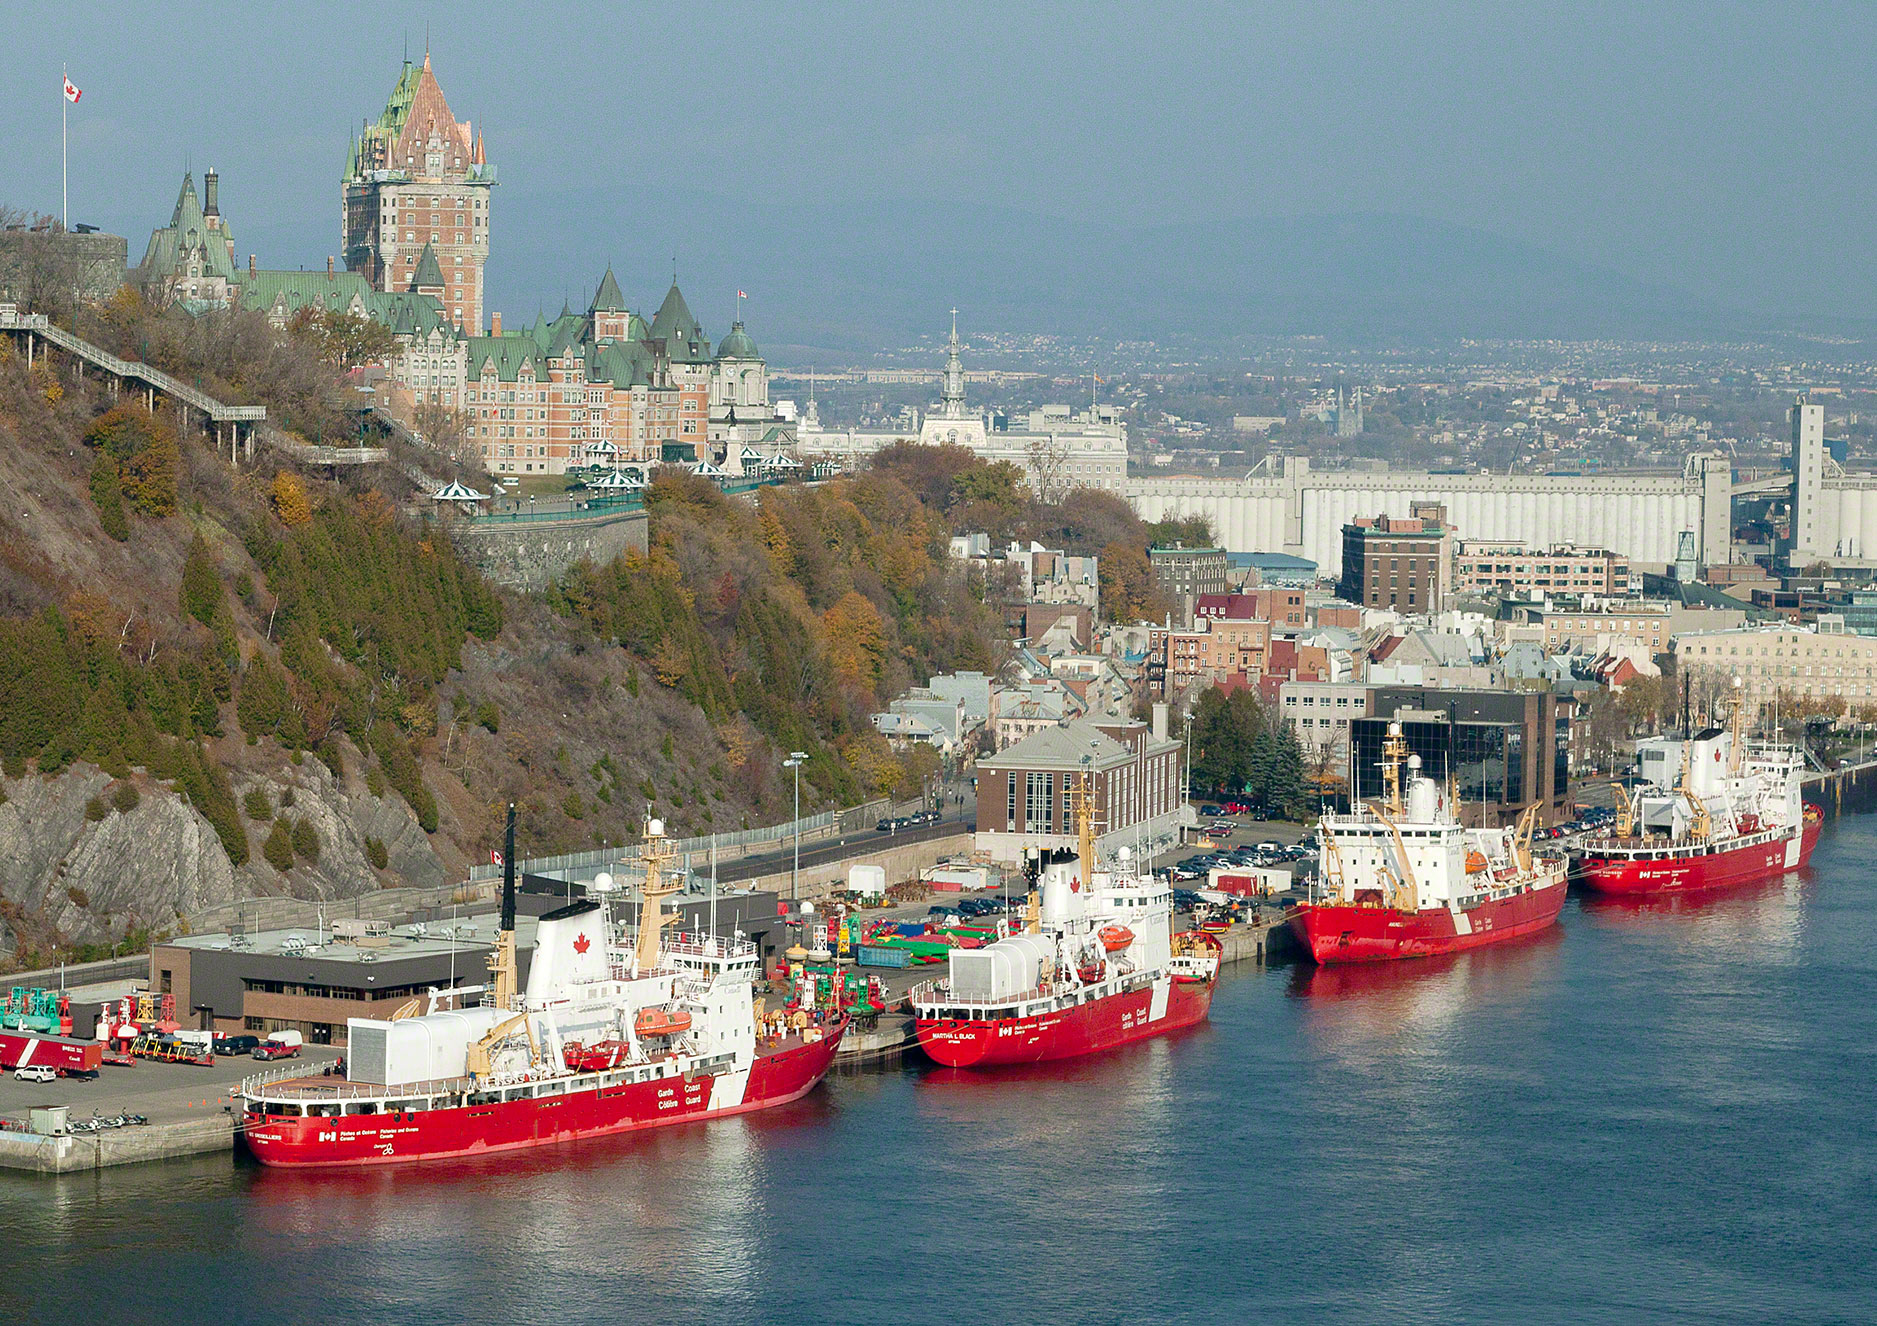 The Canadian Coast Guard base in the City of Quebec